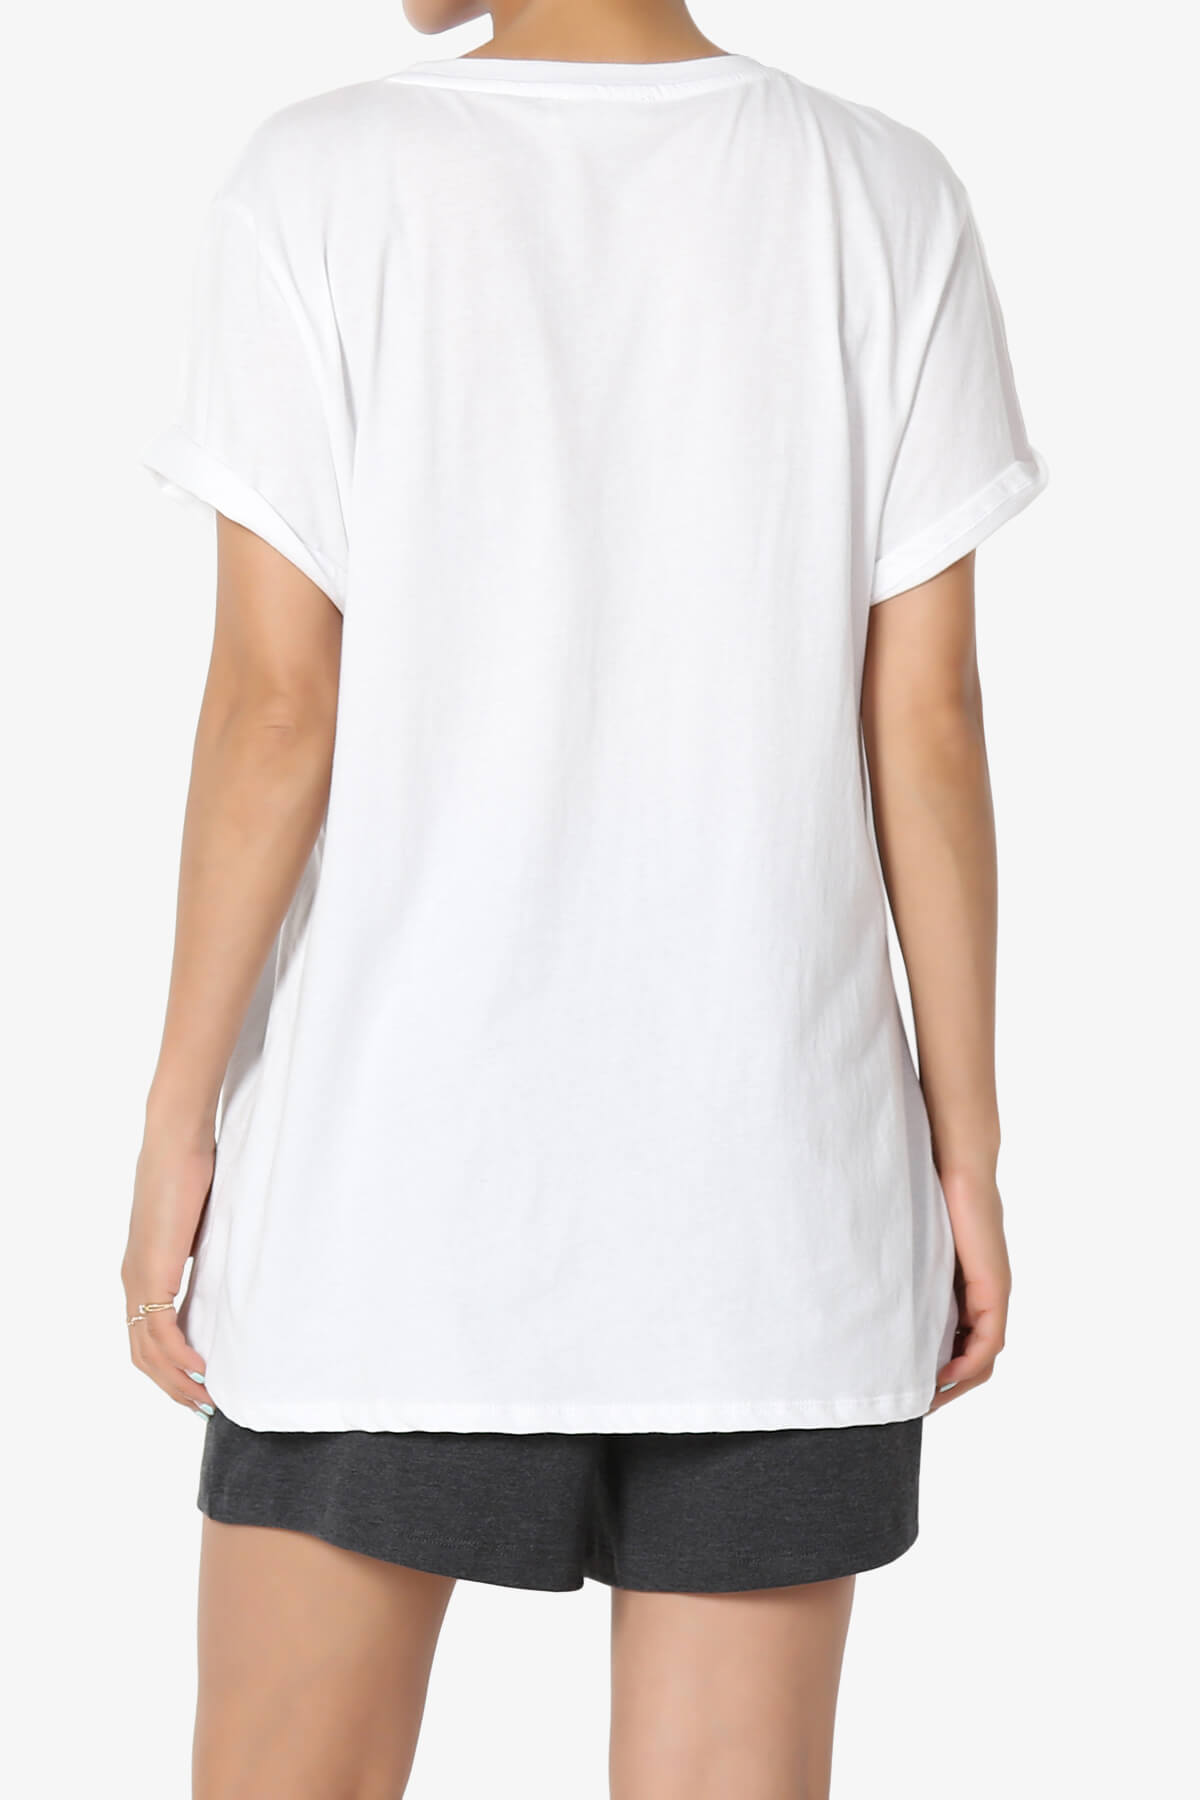 Load image into Gallery viewer, Mayra O Neck Cotton Boyfriend Tee WHITE_2
